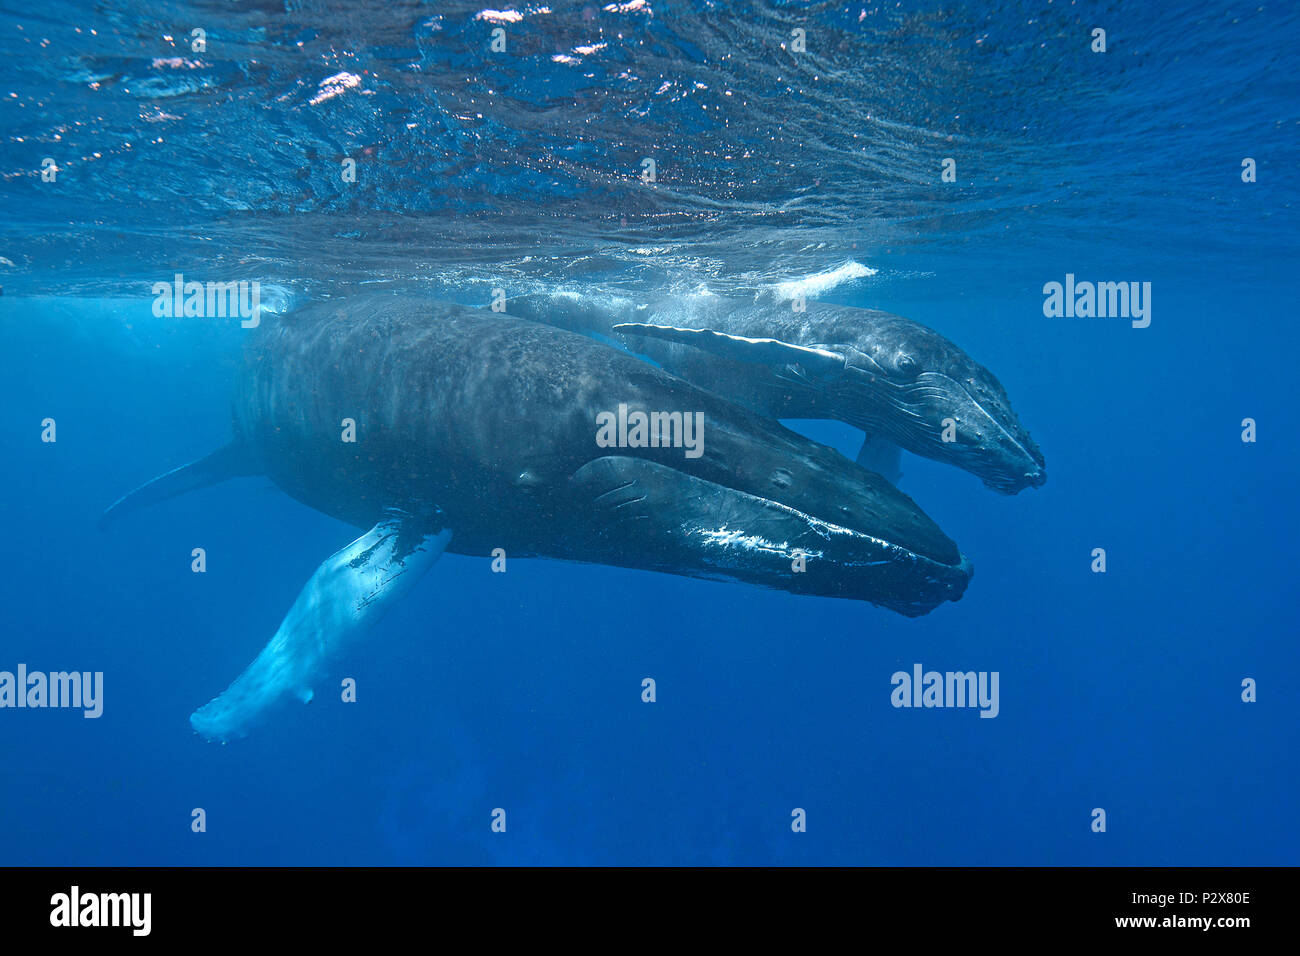 Humpback whales (Megaptera novaeangliae), mother with calf, Silverbanks, Dominican Republic Stock Photo